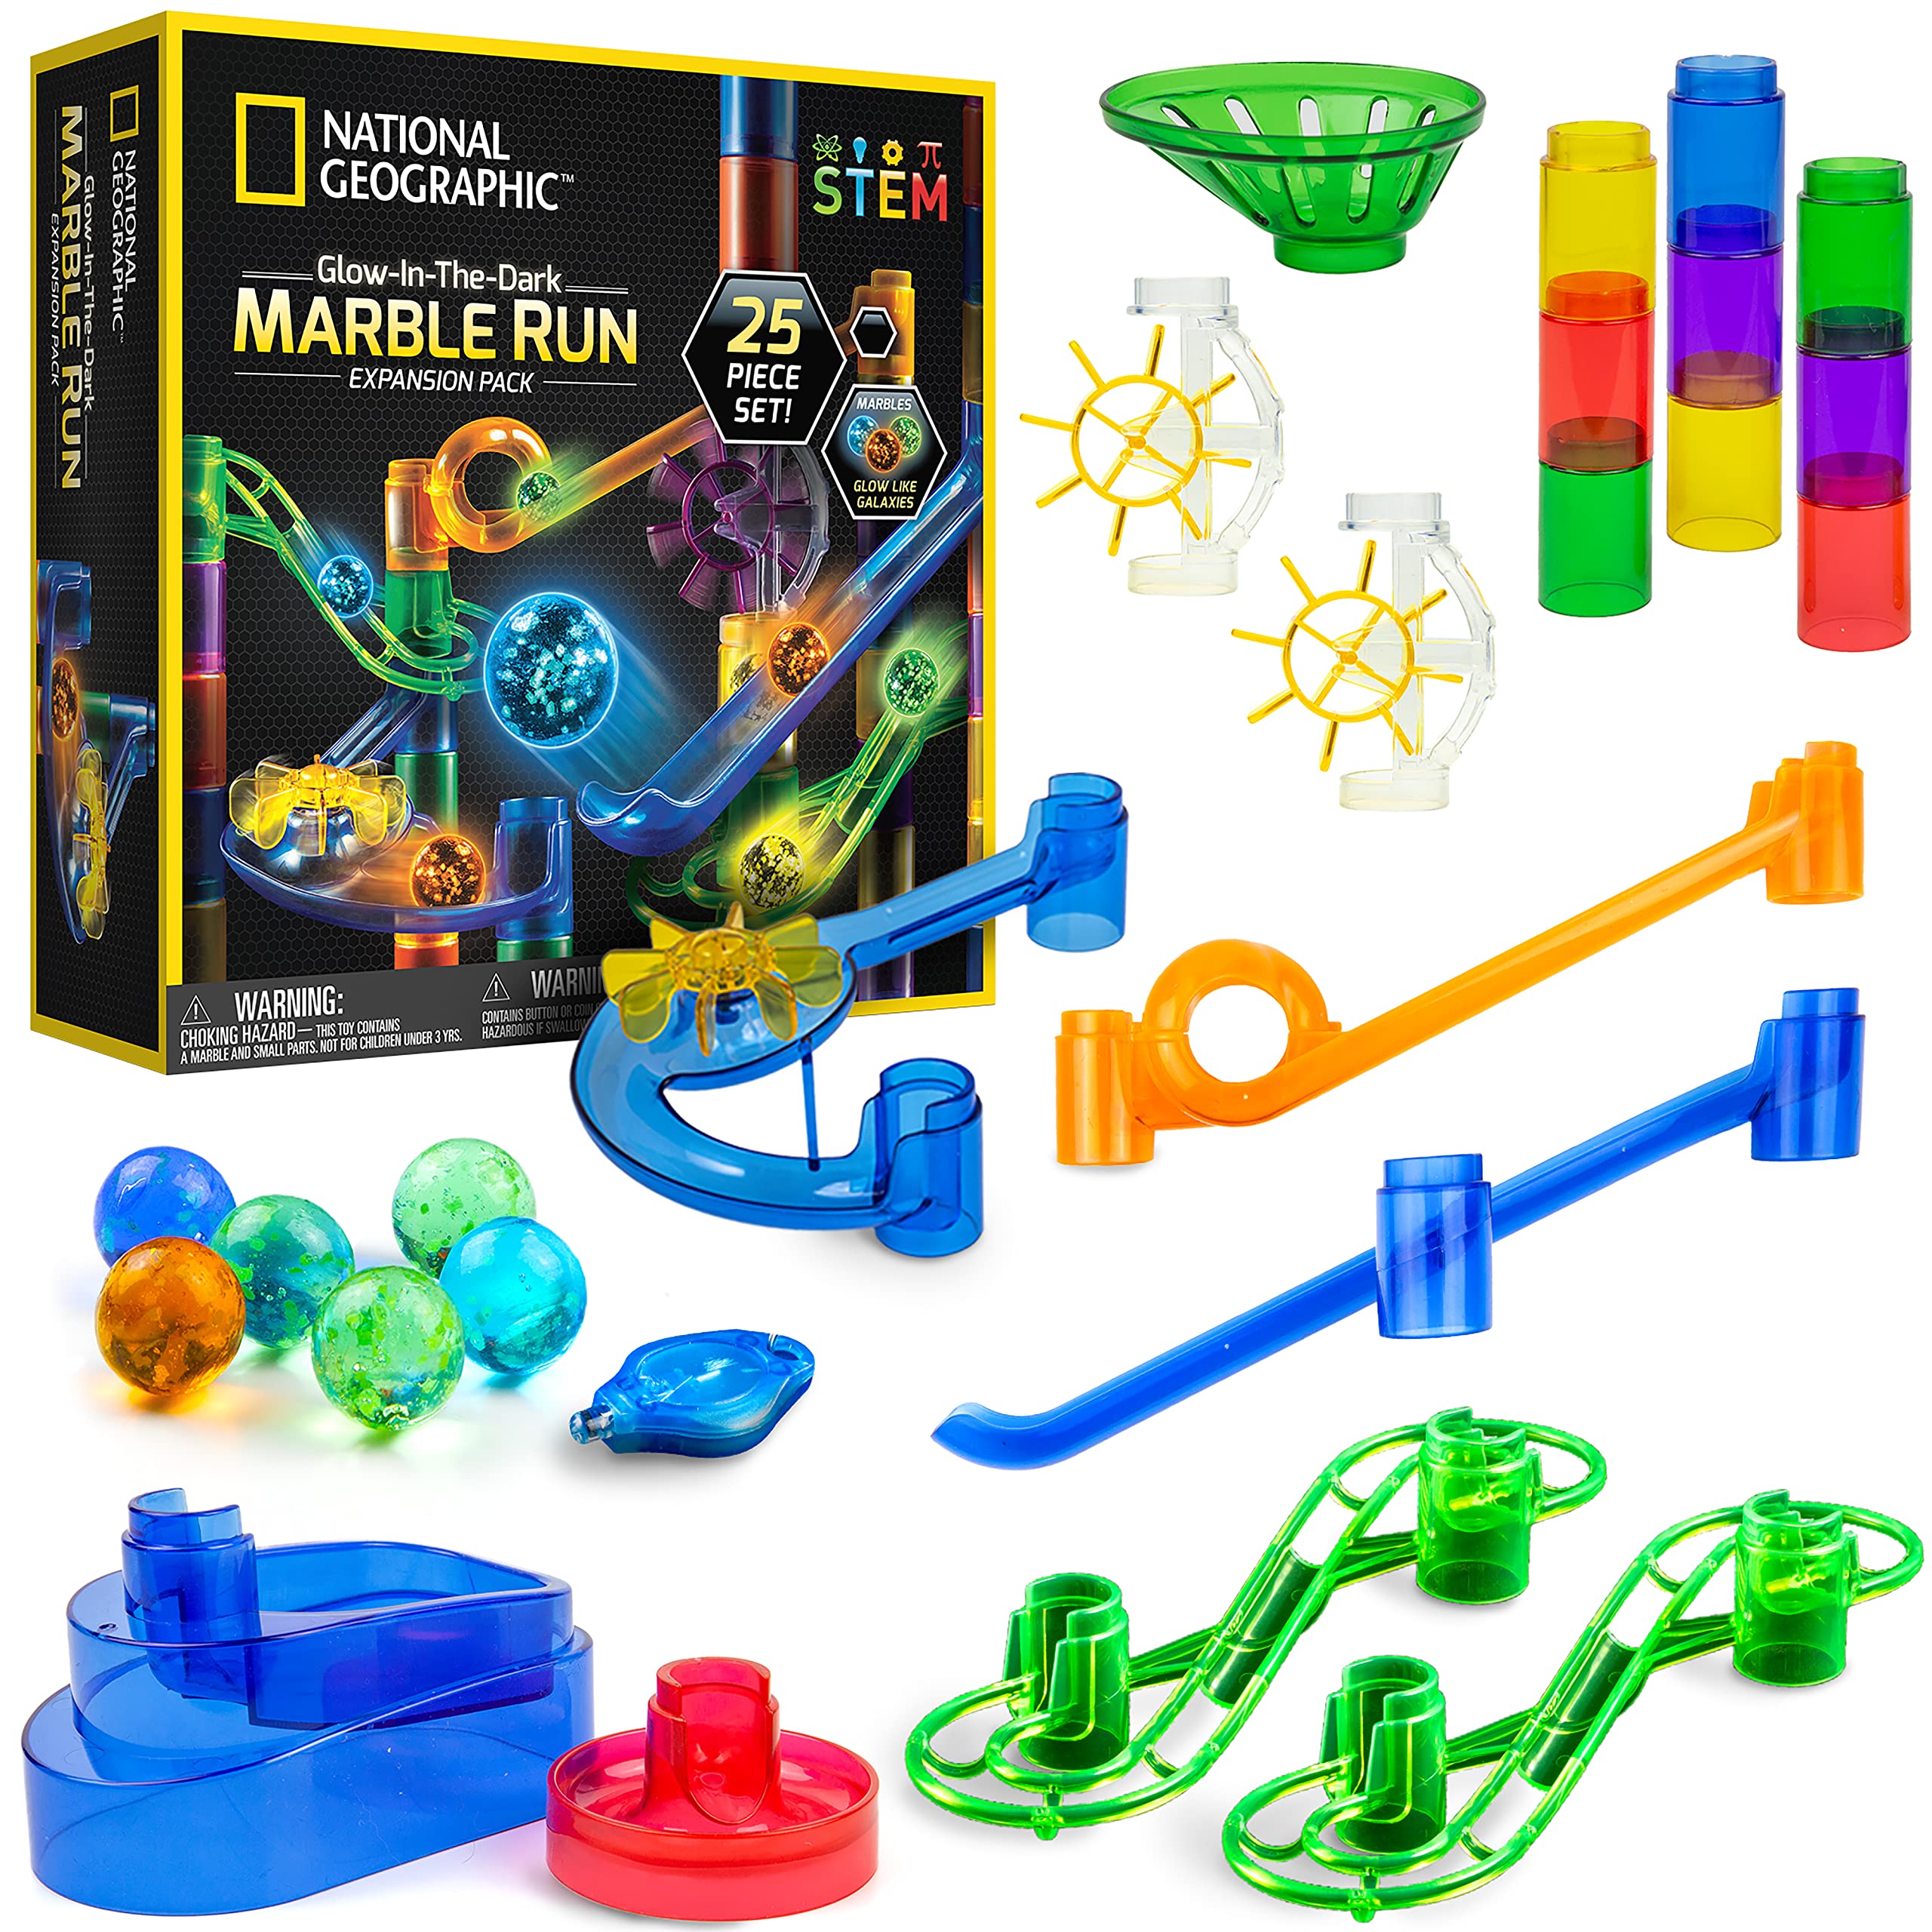 NATIONAL GEOGRAPHIC Glowing Marble Run – Expansion Pack with 5 Glow in The Dark Glass Marbles, 20 Construction Pieces, UV Light, Great Creative STEM Toy for Girls and Boys